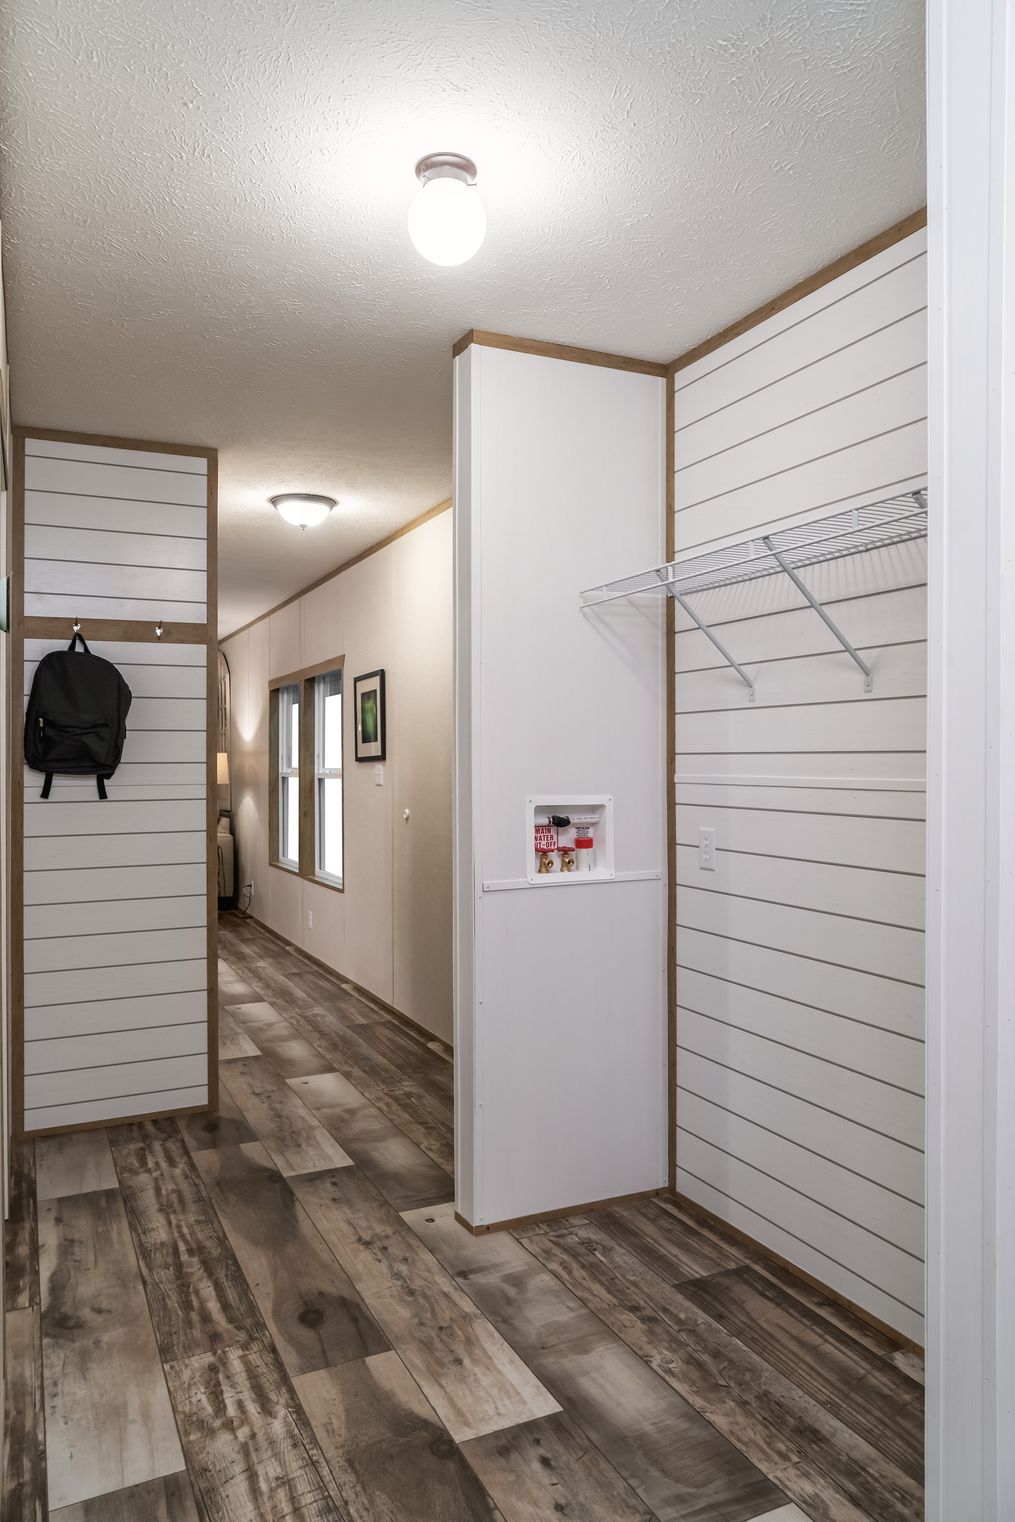 The BLAZER EXTREME 1666 F Utility Room. This Manufactured Mobile Home features 3 bedrooms and 2 baths.